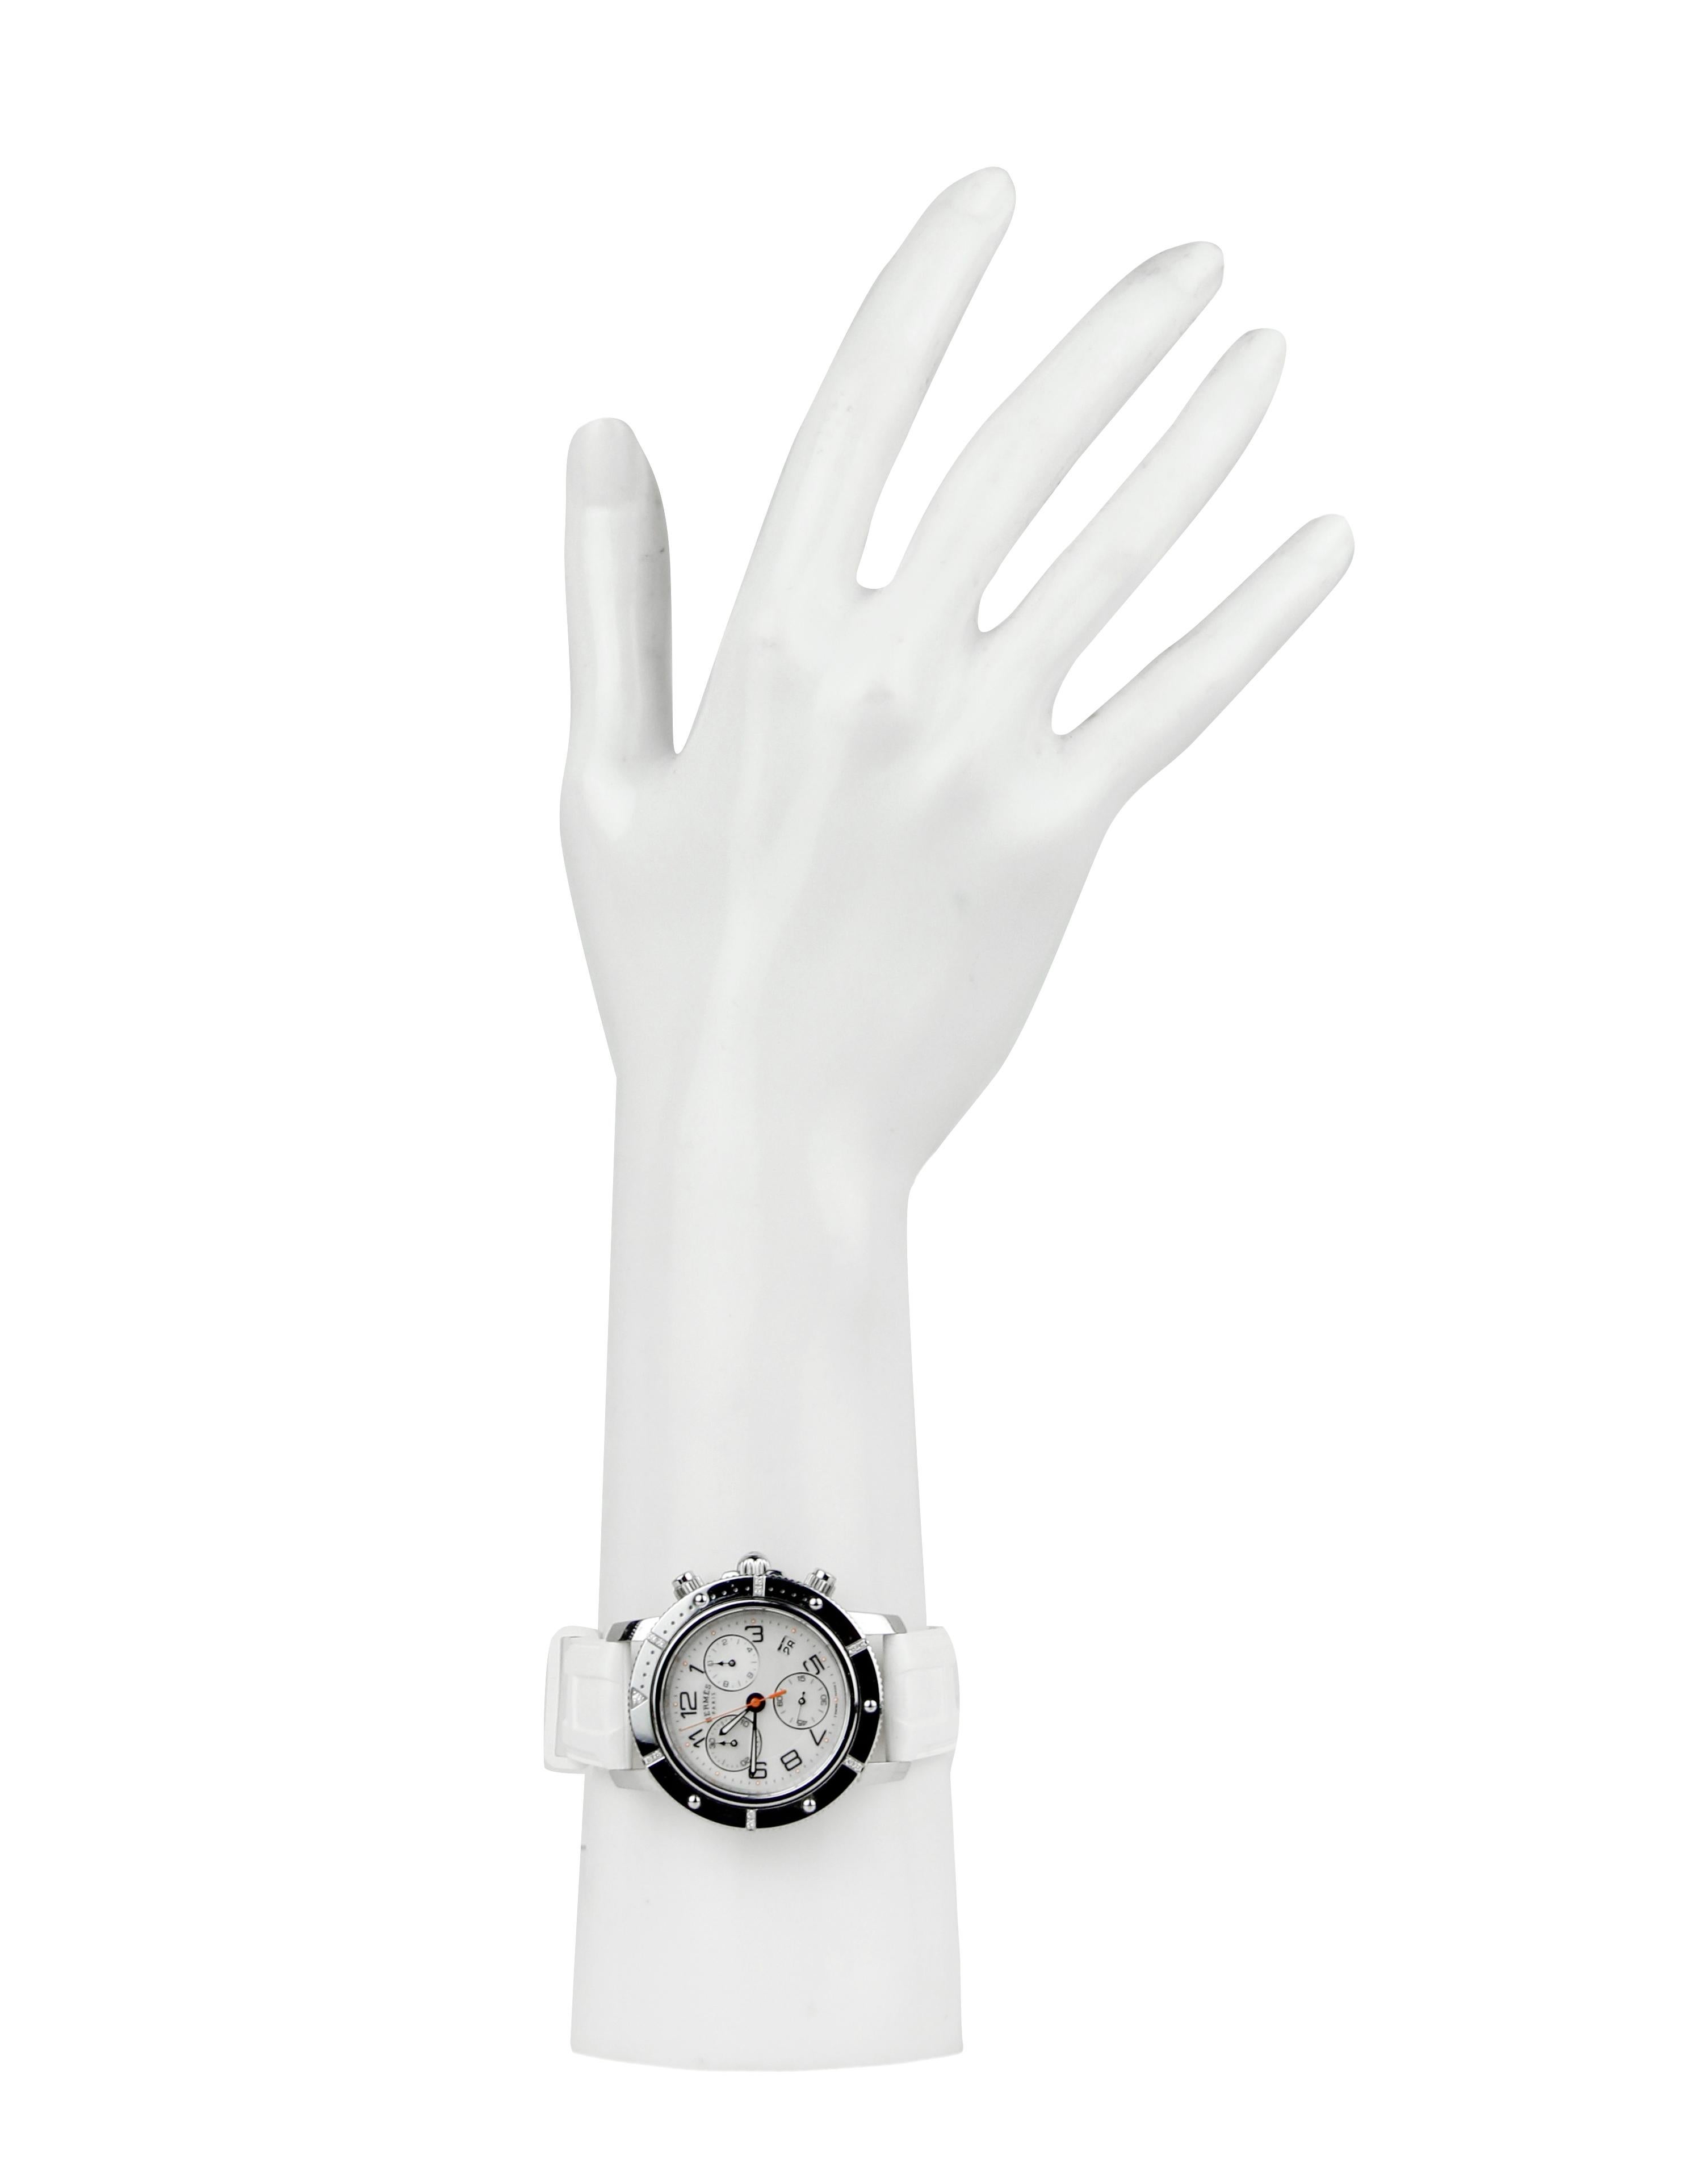 Hermes Cronograph Quartz Clipper Watch w/ Diamonds & White Rubber Band. Features mother of pearl face with arabic numeral markers

Made In: Switzerland
Color: Silver, white
Materials: Stainless steel, rubber, diamonds, mother of